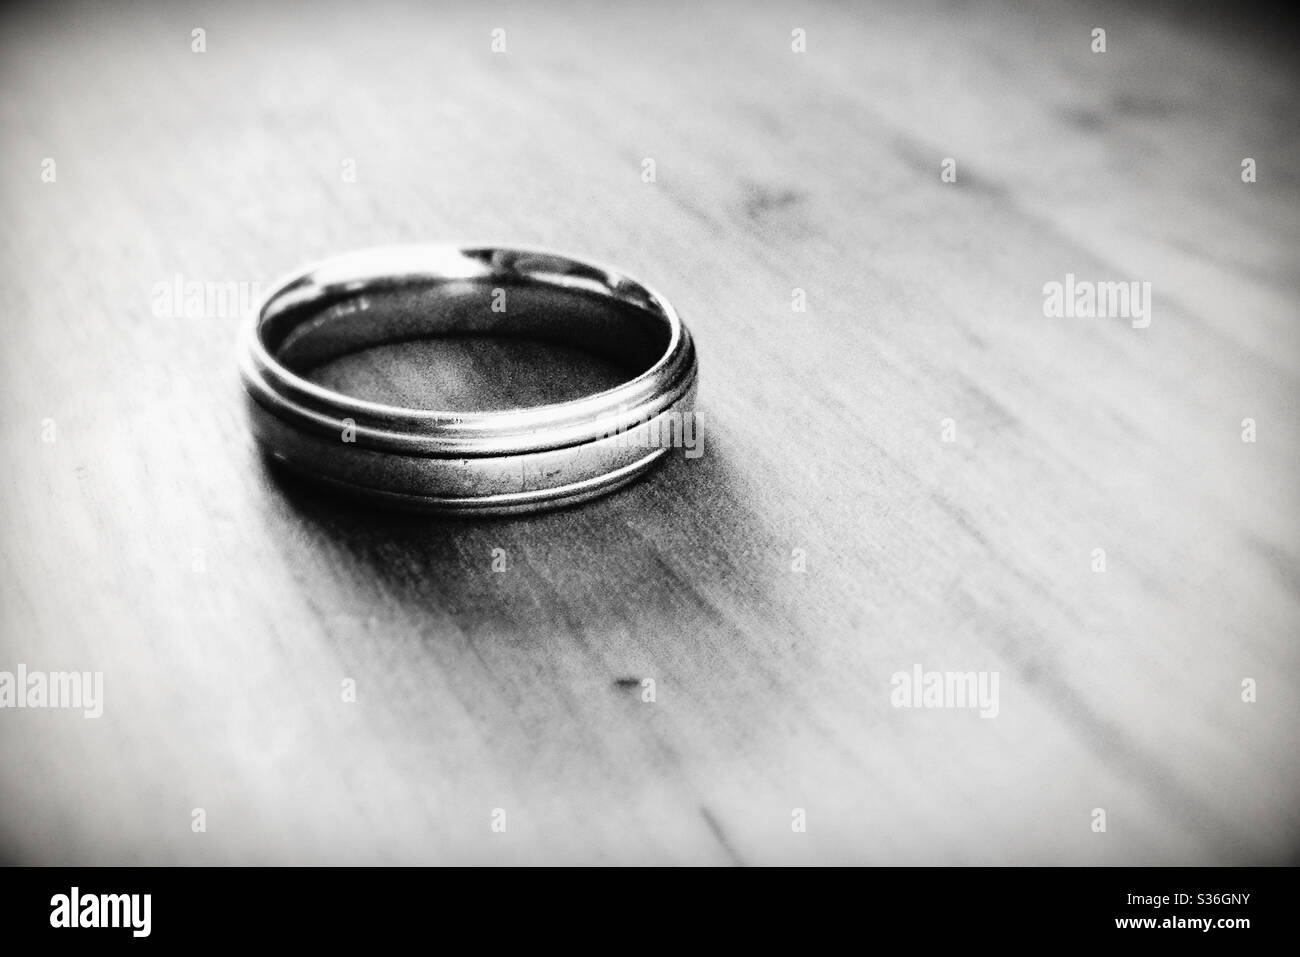 Close Up of Man's Wedding Ring in Black and White Stock Photo